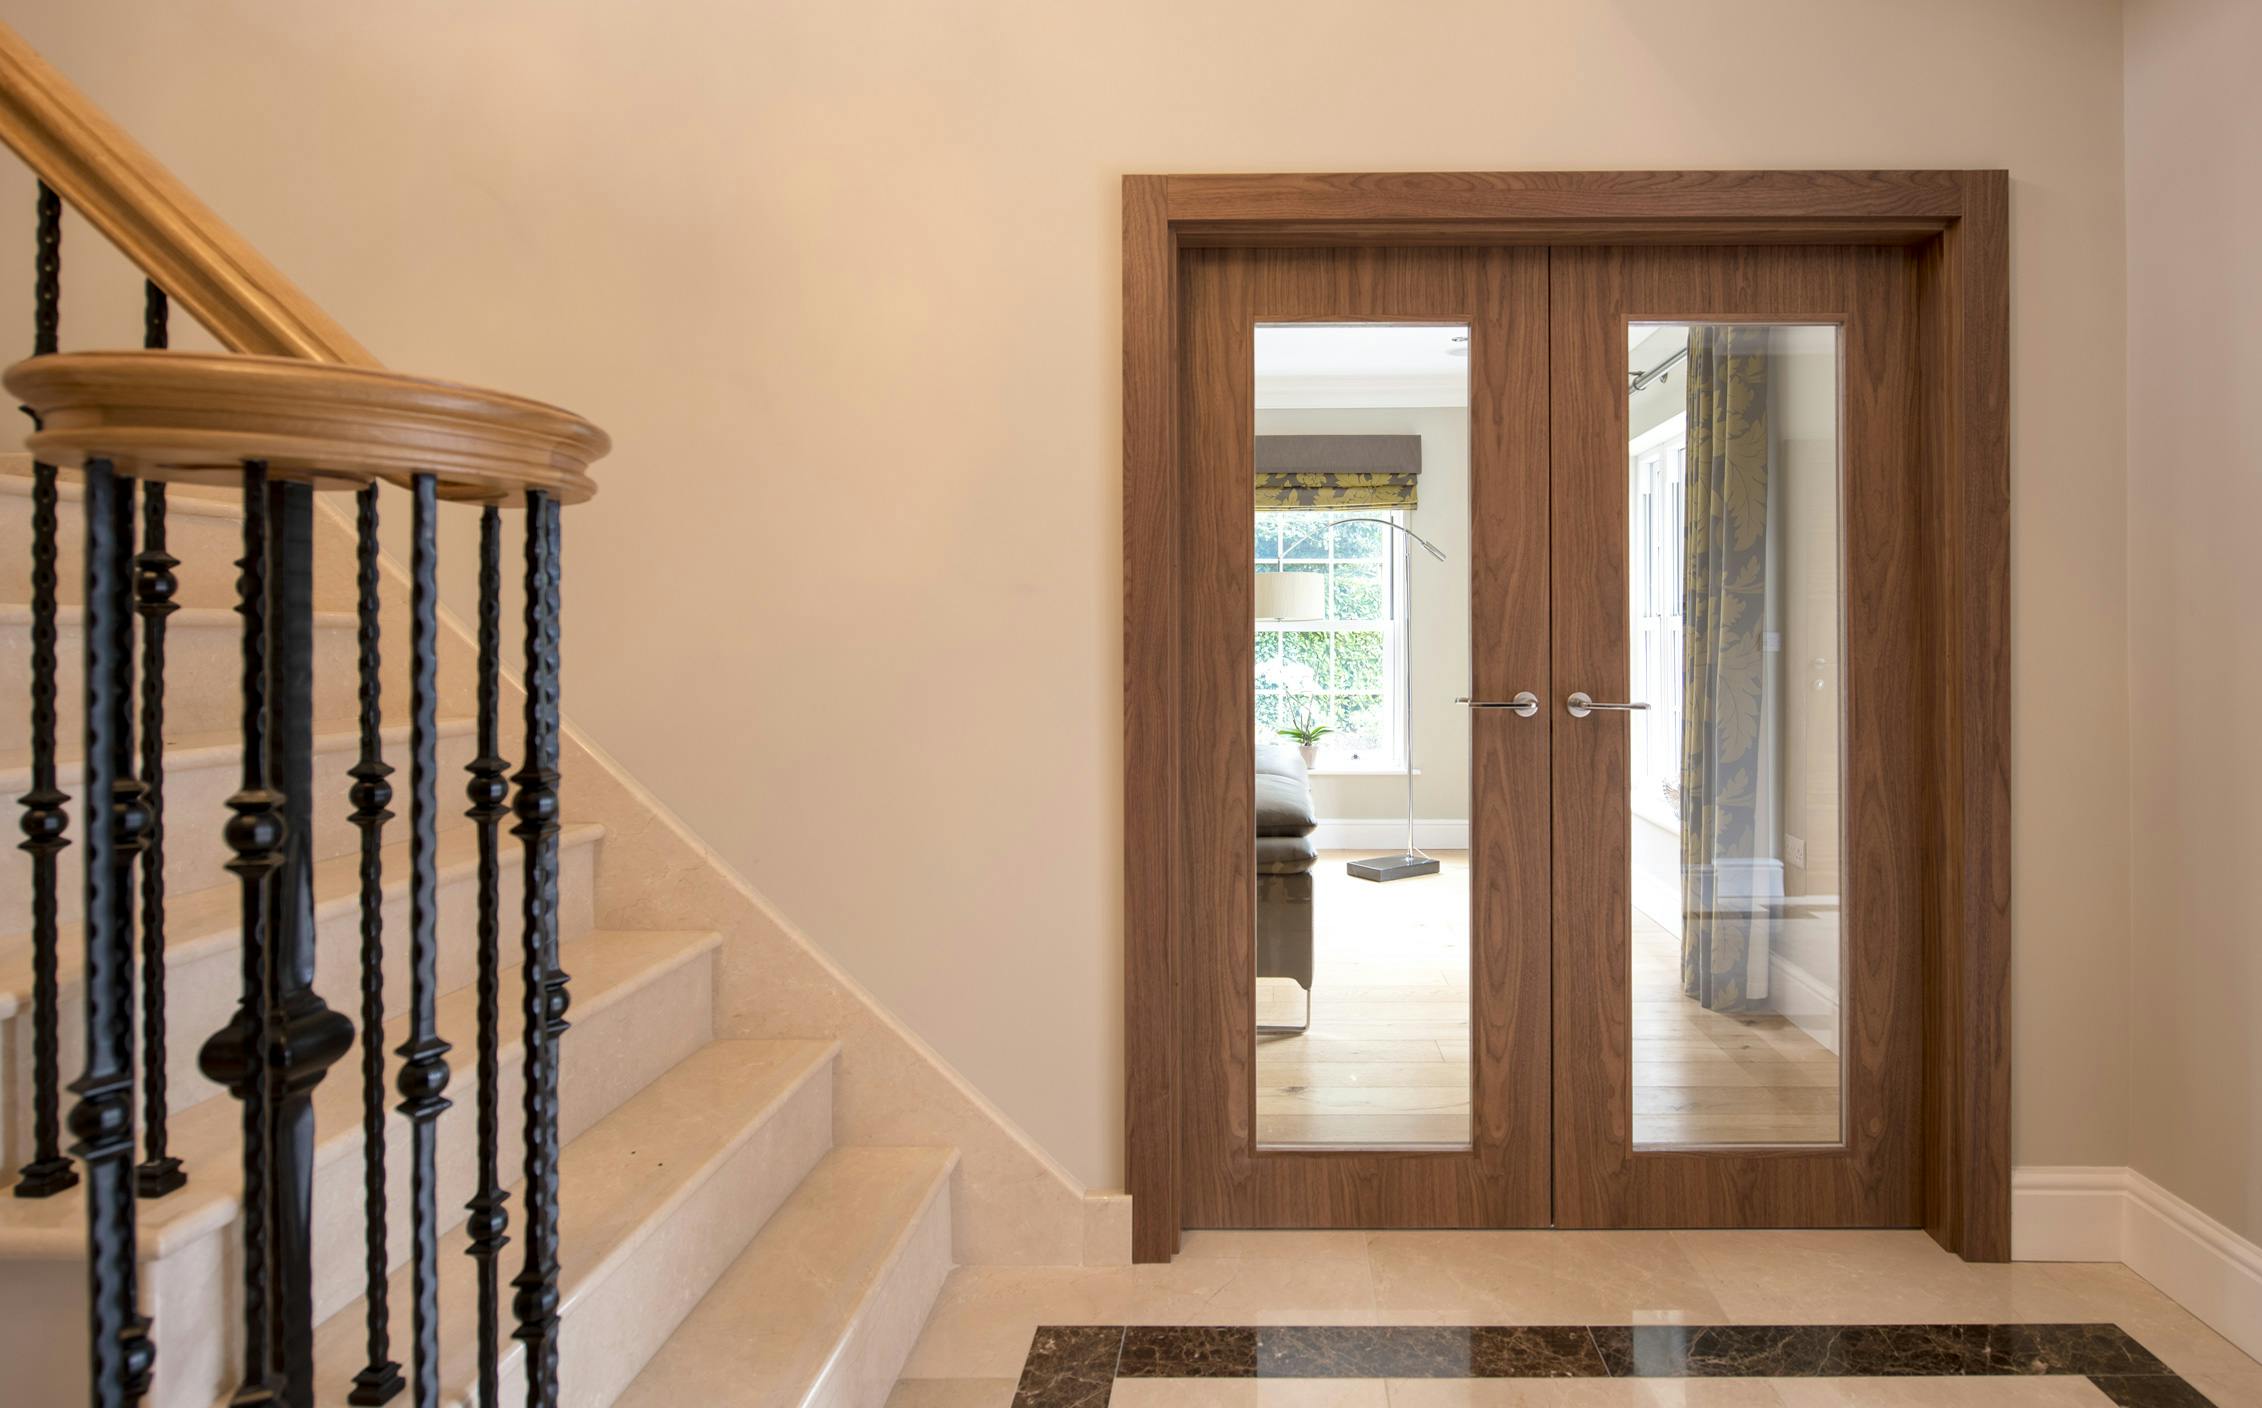 Luxurious hallway with side view of iron staircase and bespoke double door set by Deuren - Gio glass, Walnut finish, clear glass and chrome lever handles.